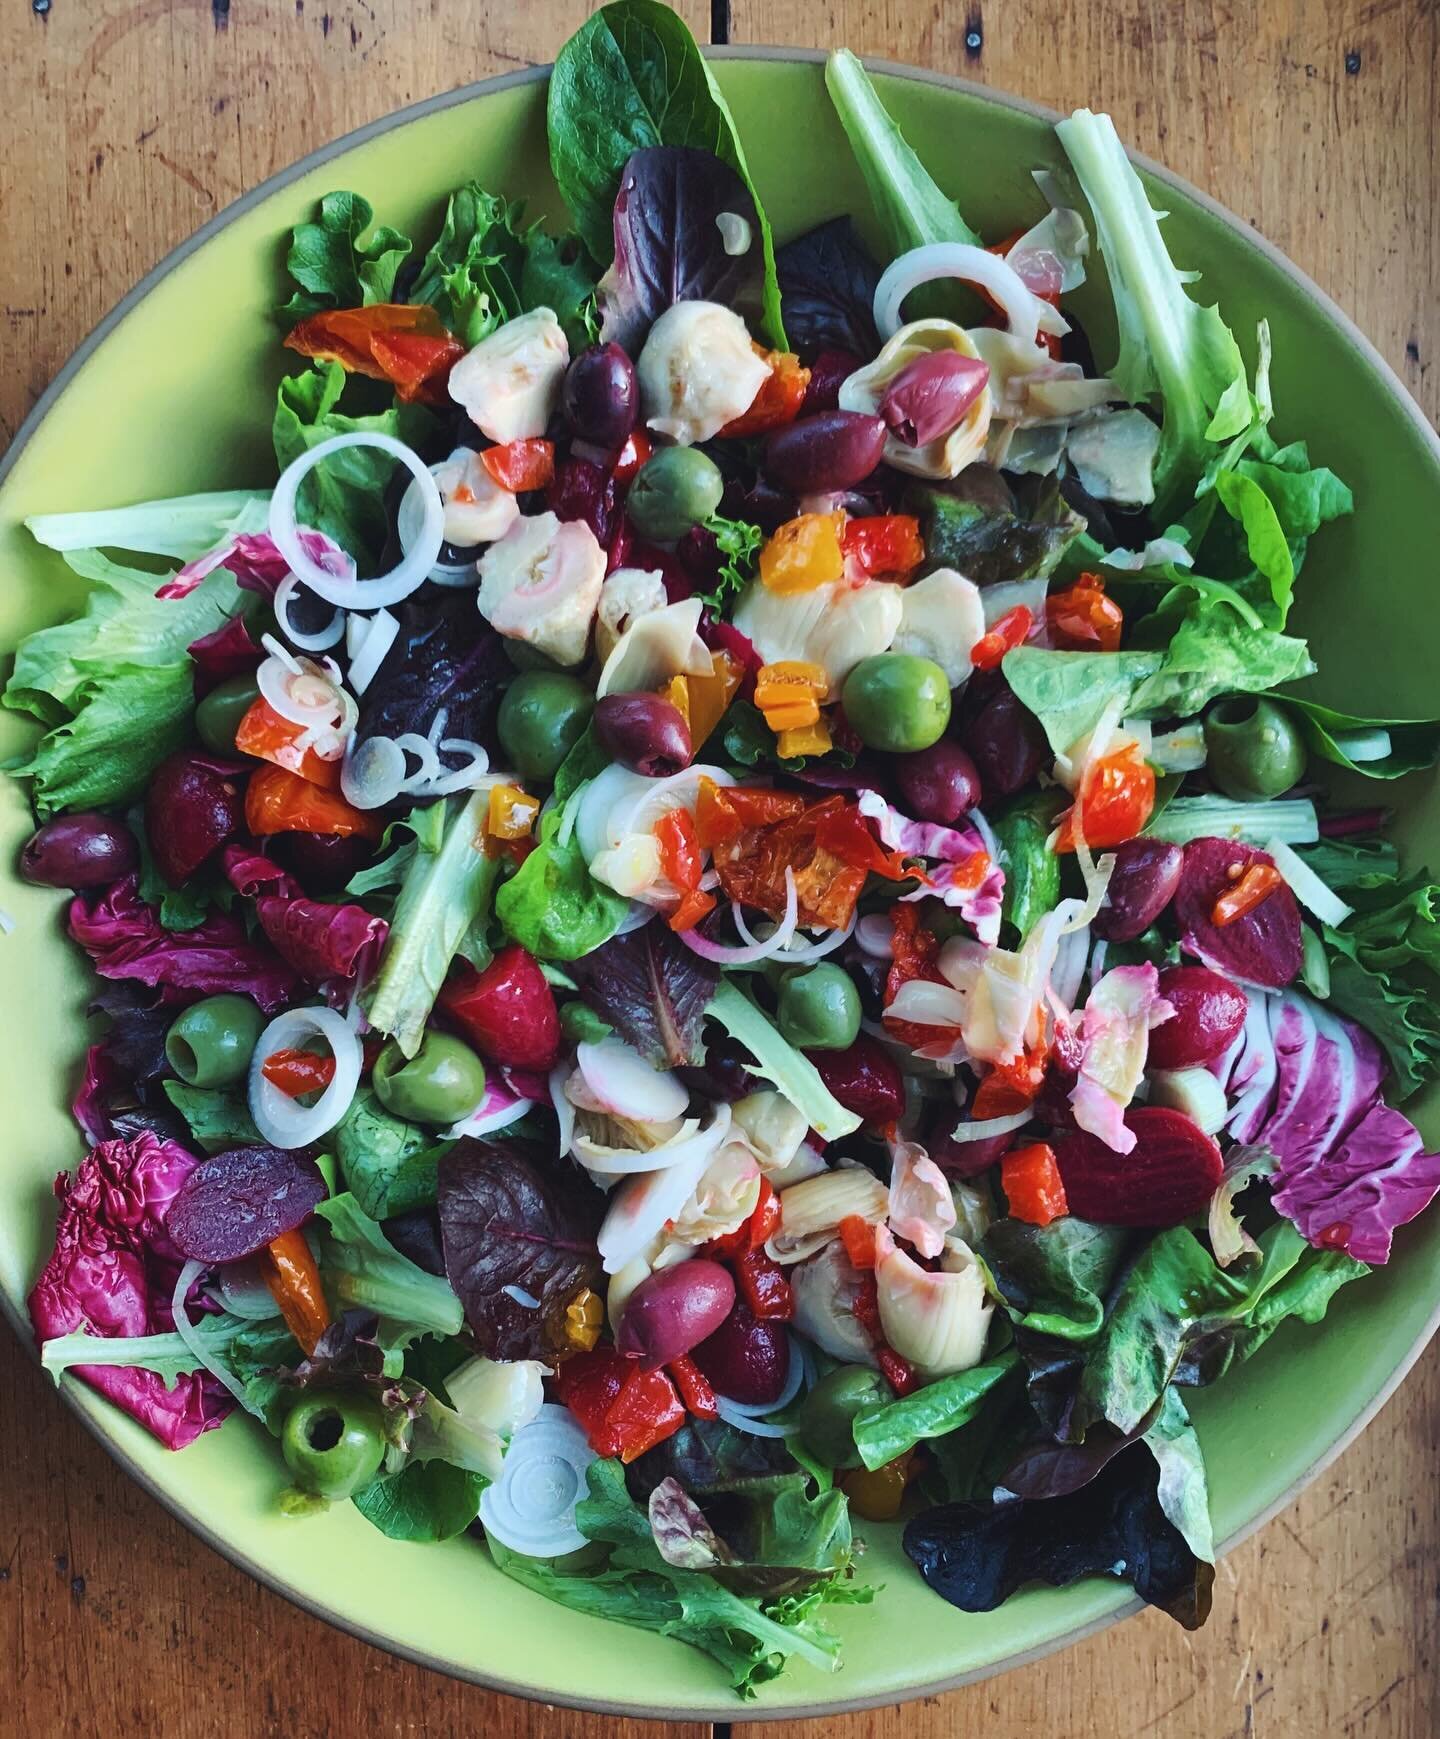 Big salad to go with leftover pizza rustica for dinner: greens 🥬 radicchio 💗 artichokes, roasted tomatoes 🍅 roasted peppers 🫑 baby beets 💓 spring onion 🧅 olives 🫒 
.
.
.
#salad #bigsalad #dinnerinspo #domenicacooks #italiansdoeatbetter